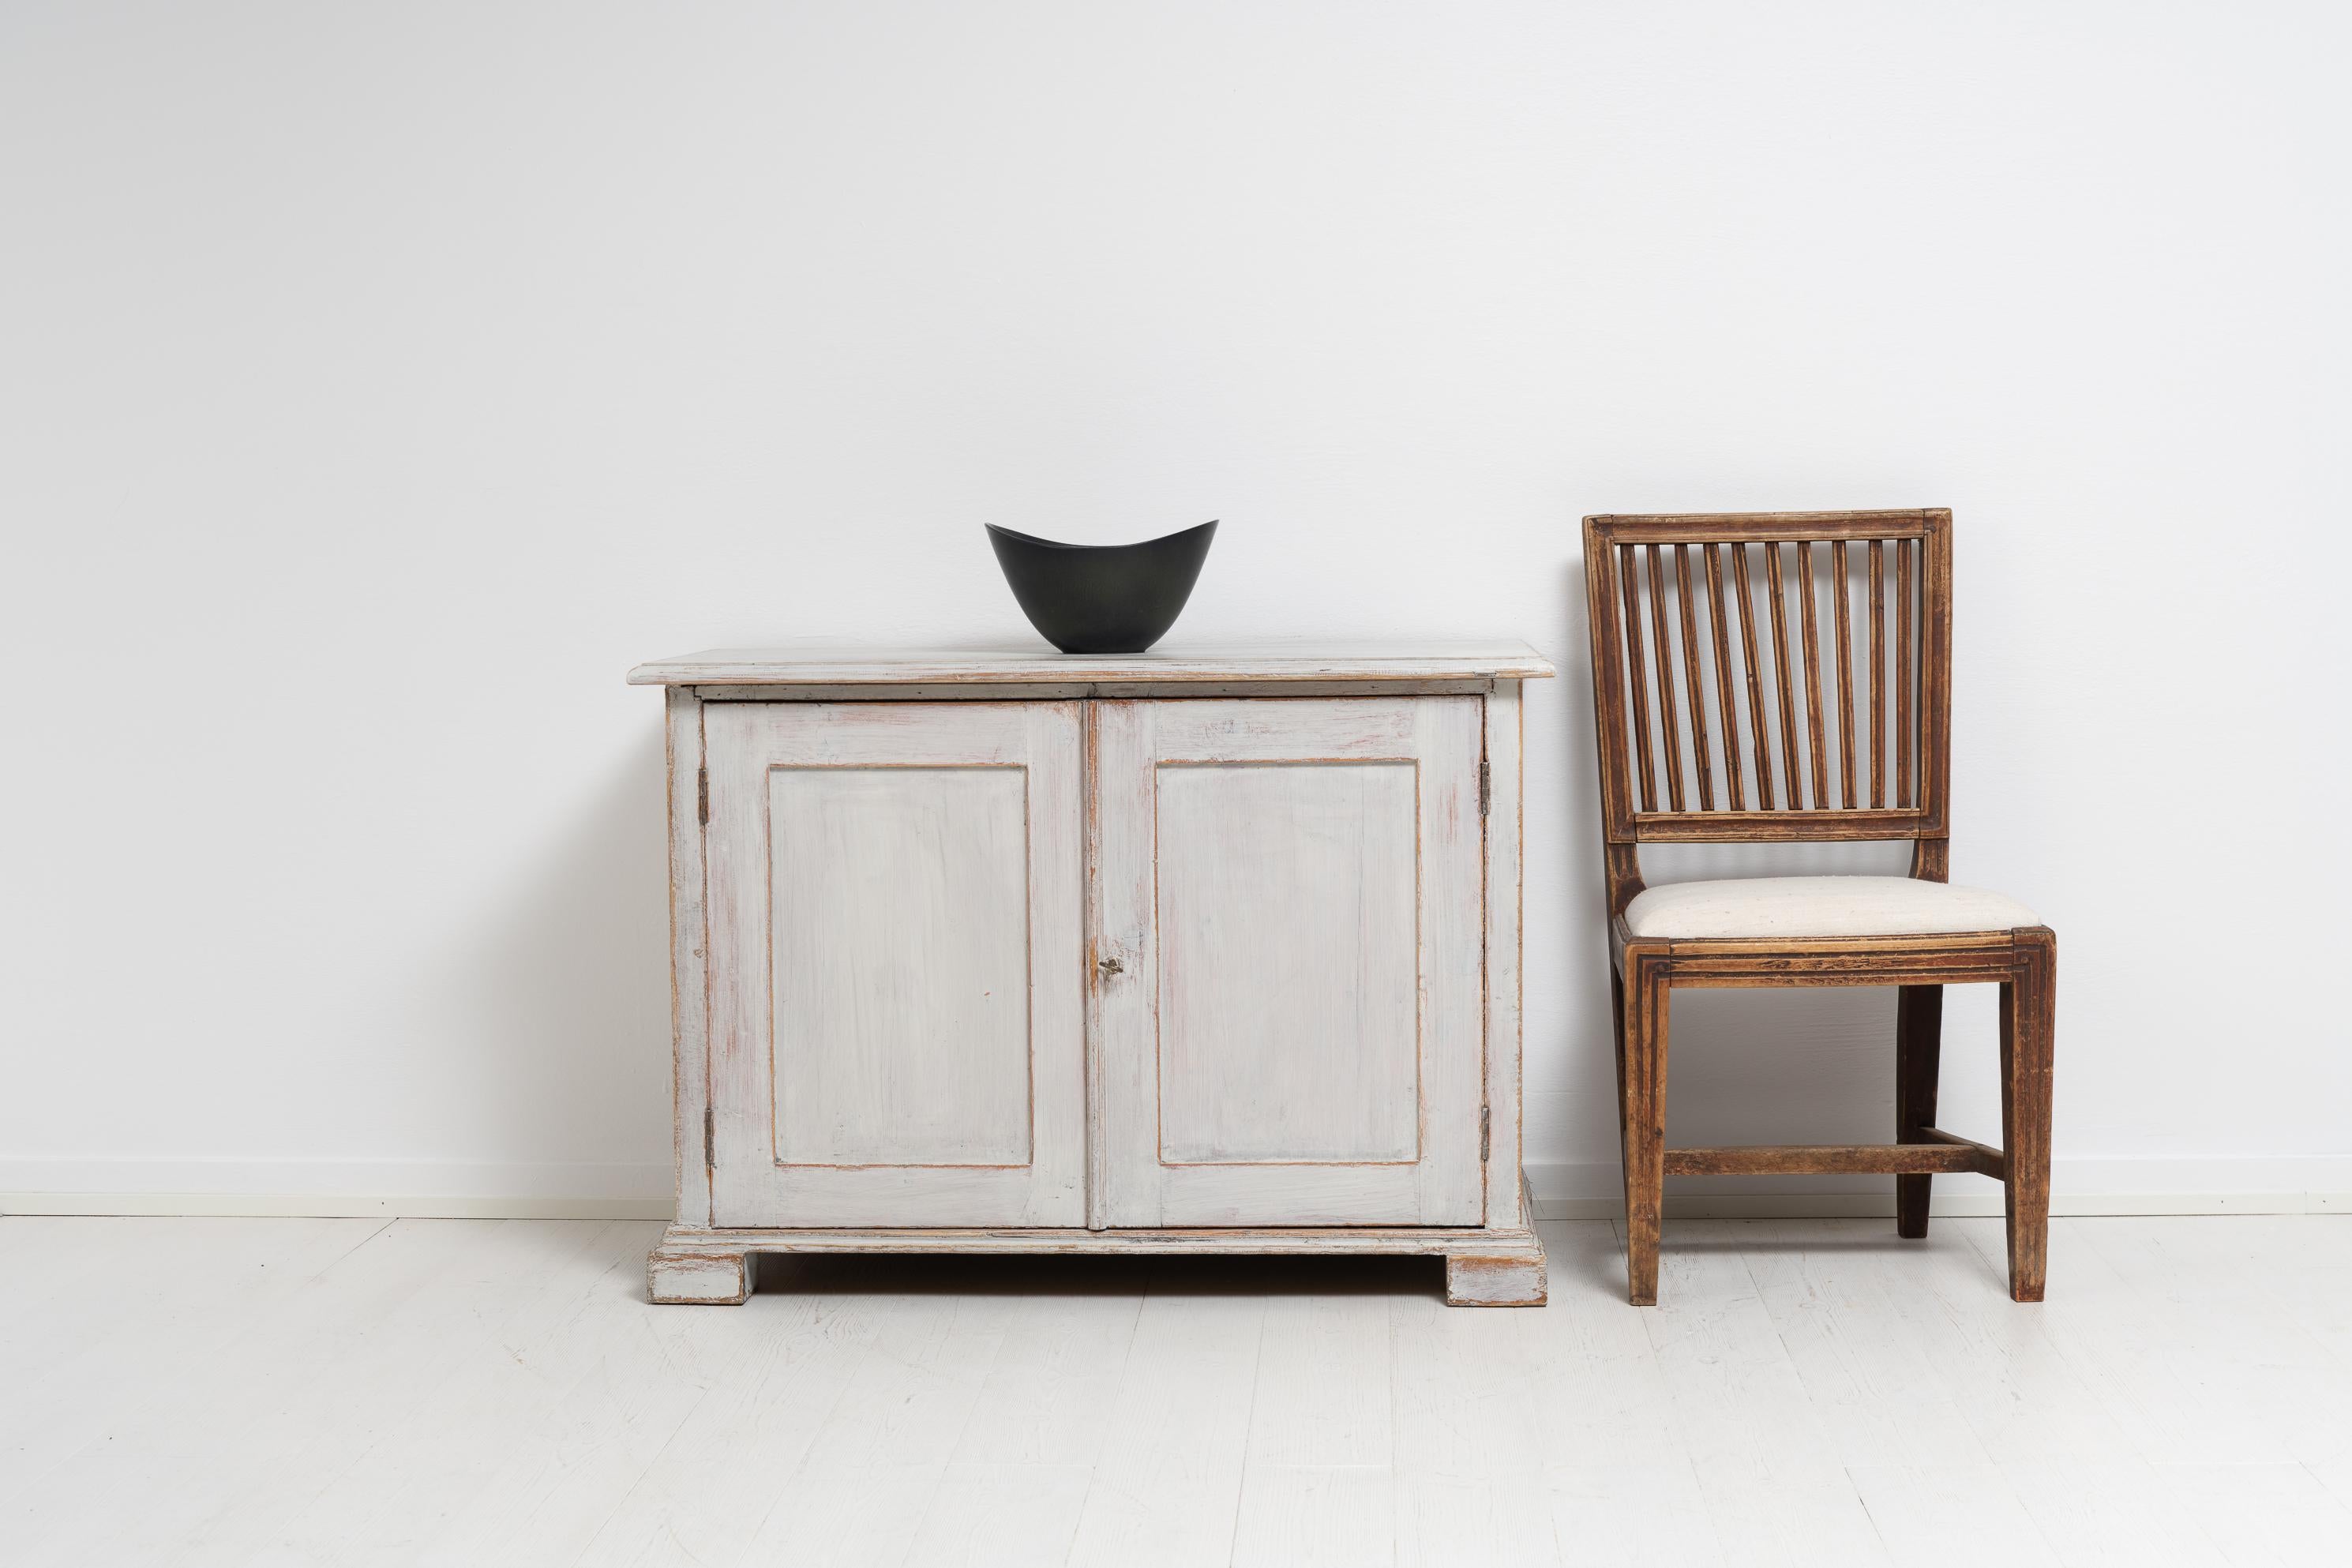 White country sideboard with interior drawers from Northern Sweden. The sideboard is from around 1860 and made by hand in solid pine. In total the sideboard has 15 smaller drawers, all with the original drawer pulls in brass. The drawers are an